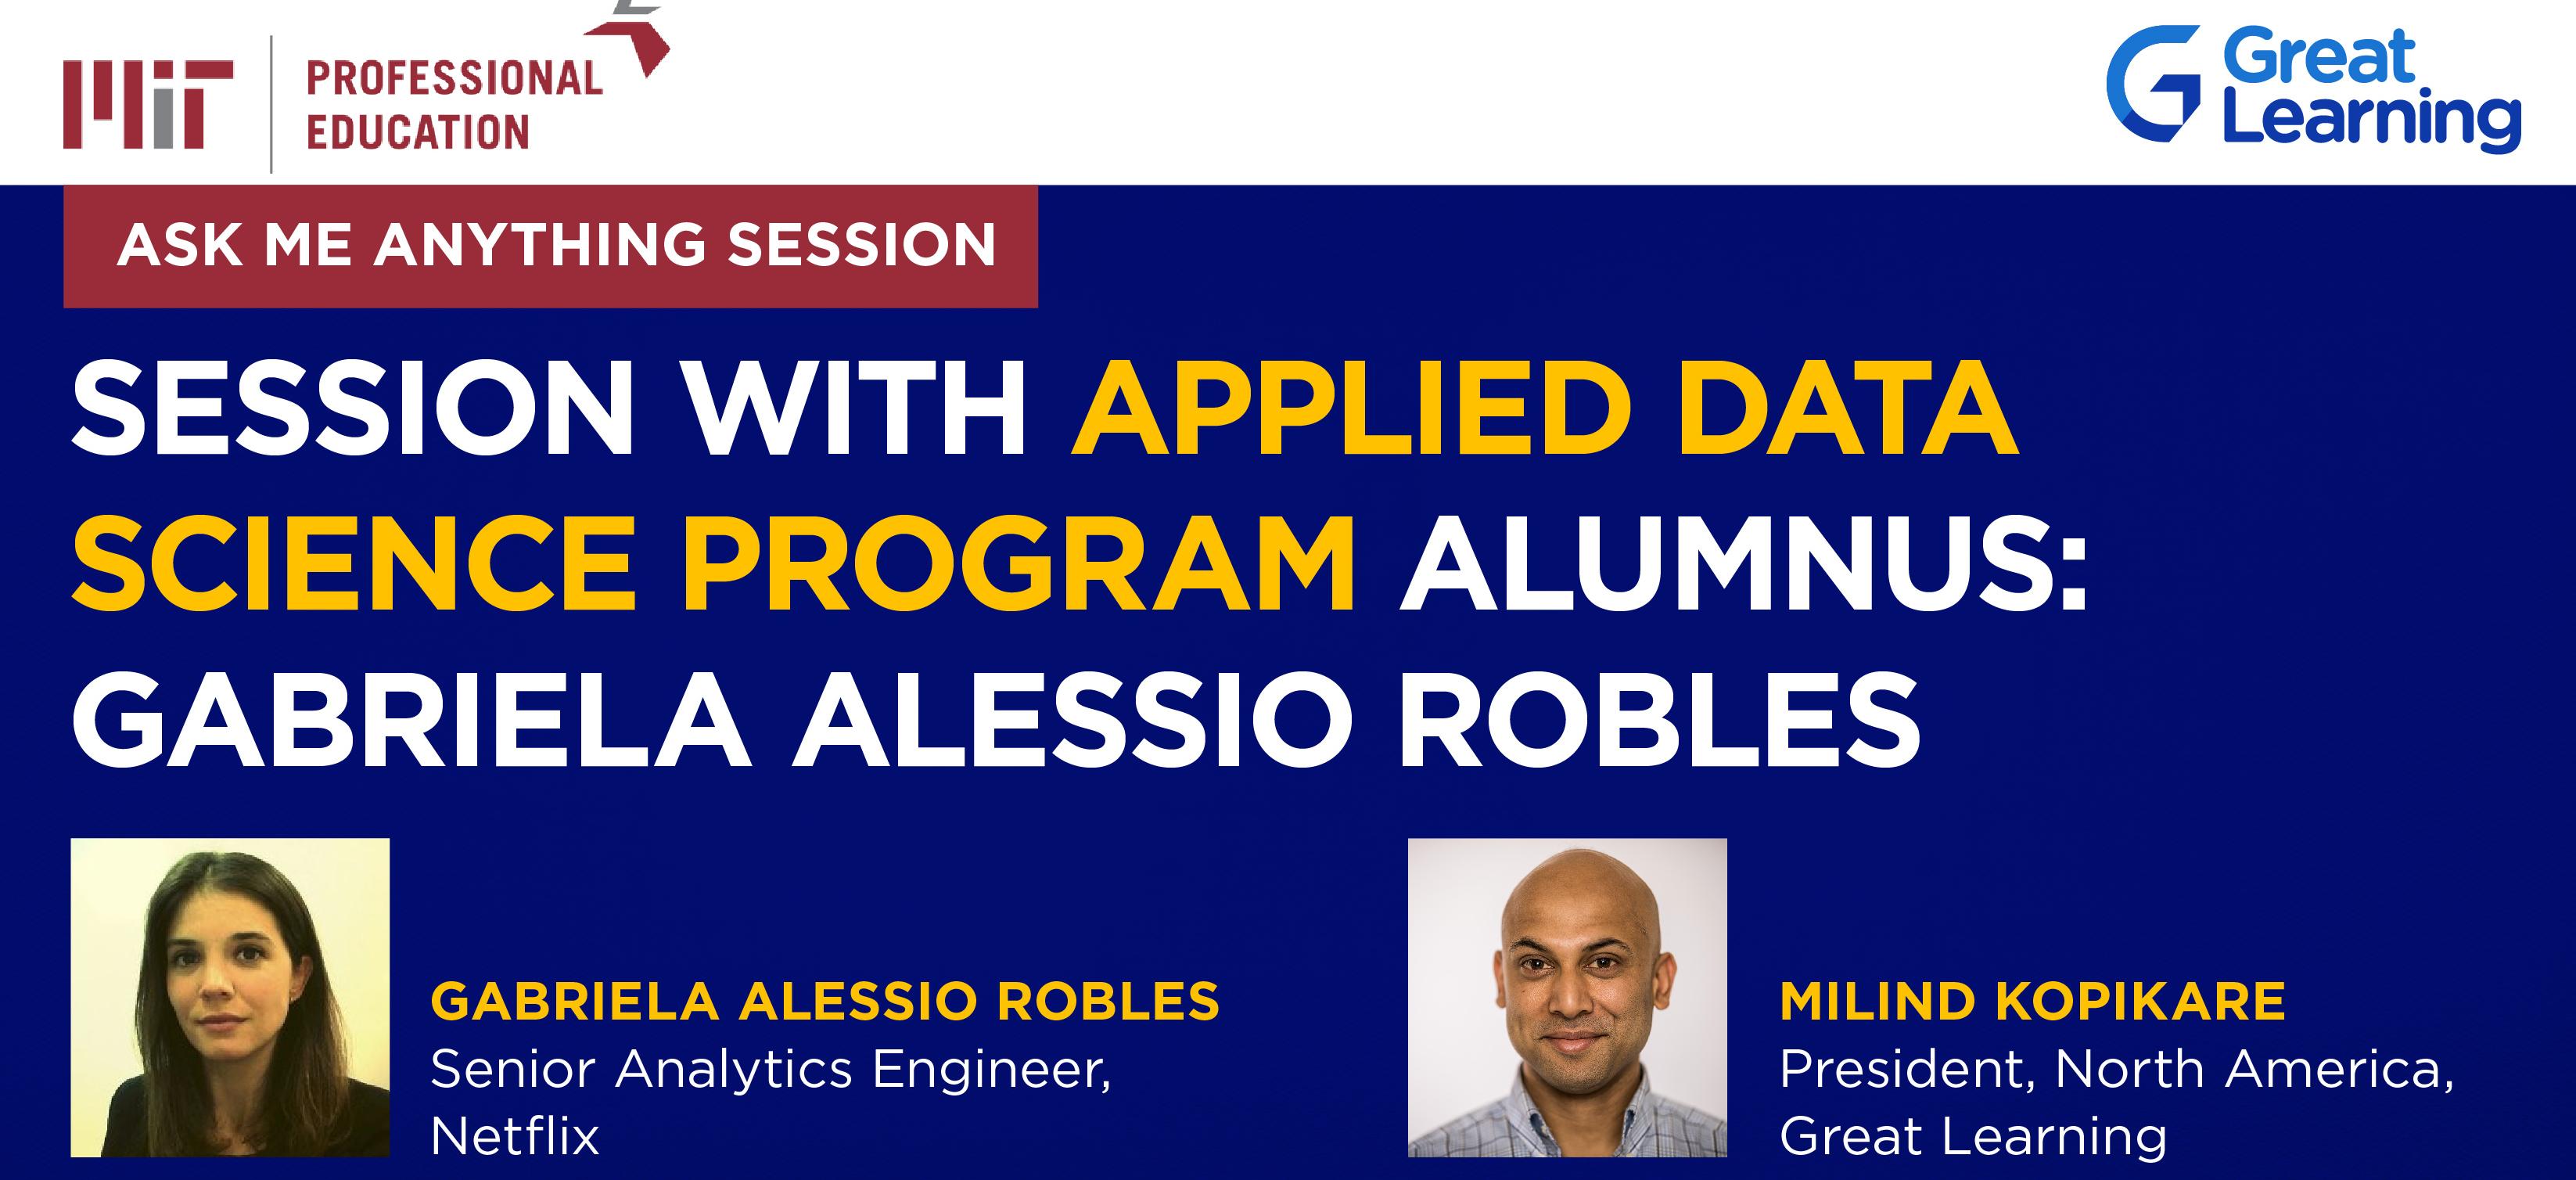 AMA Session with Applied Data Science Program Alum: Gabriela Alessio Robles